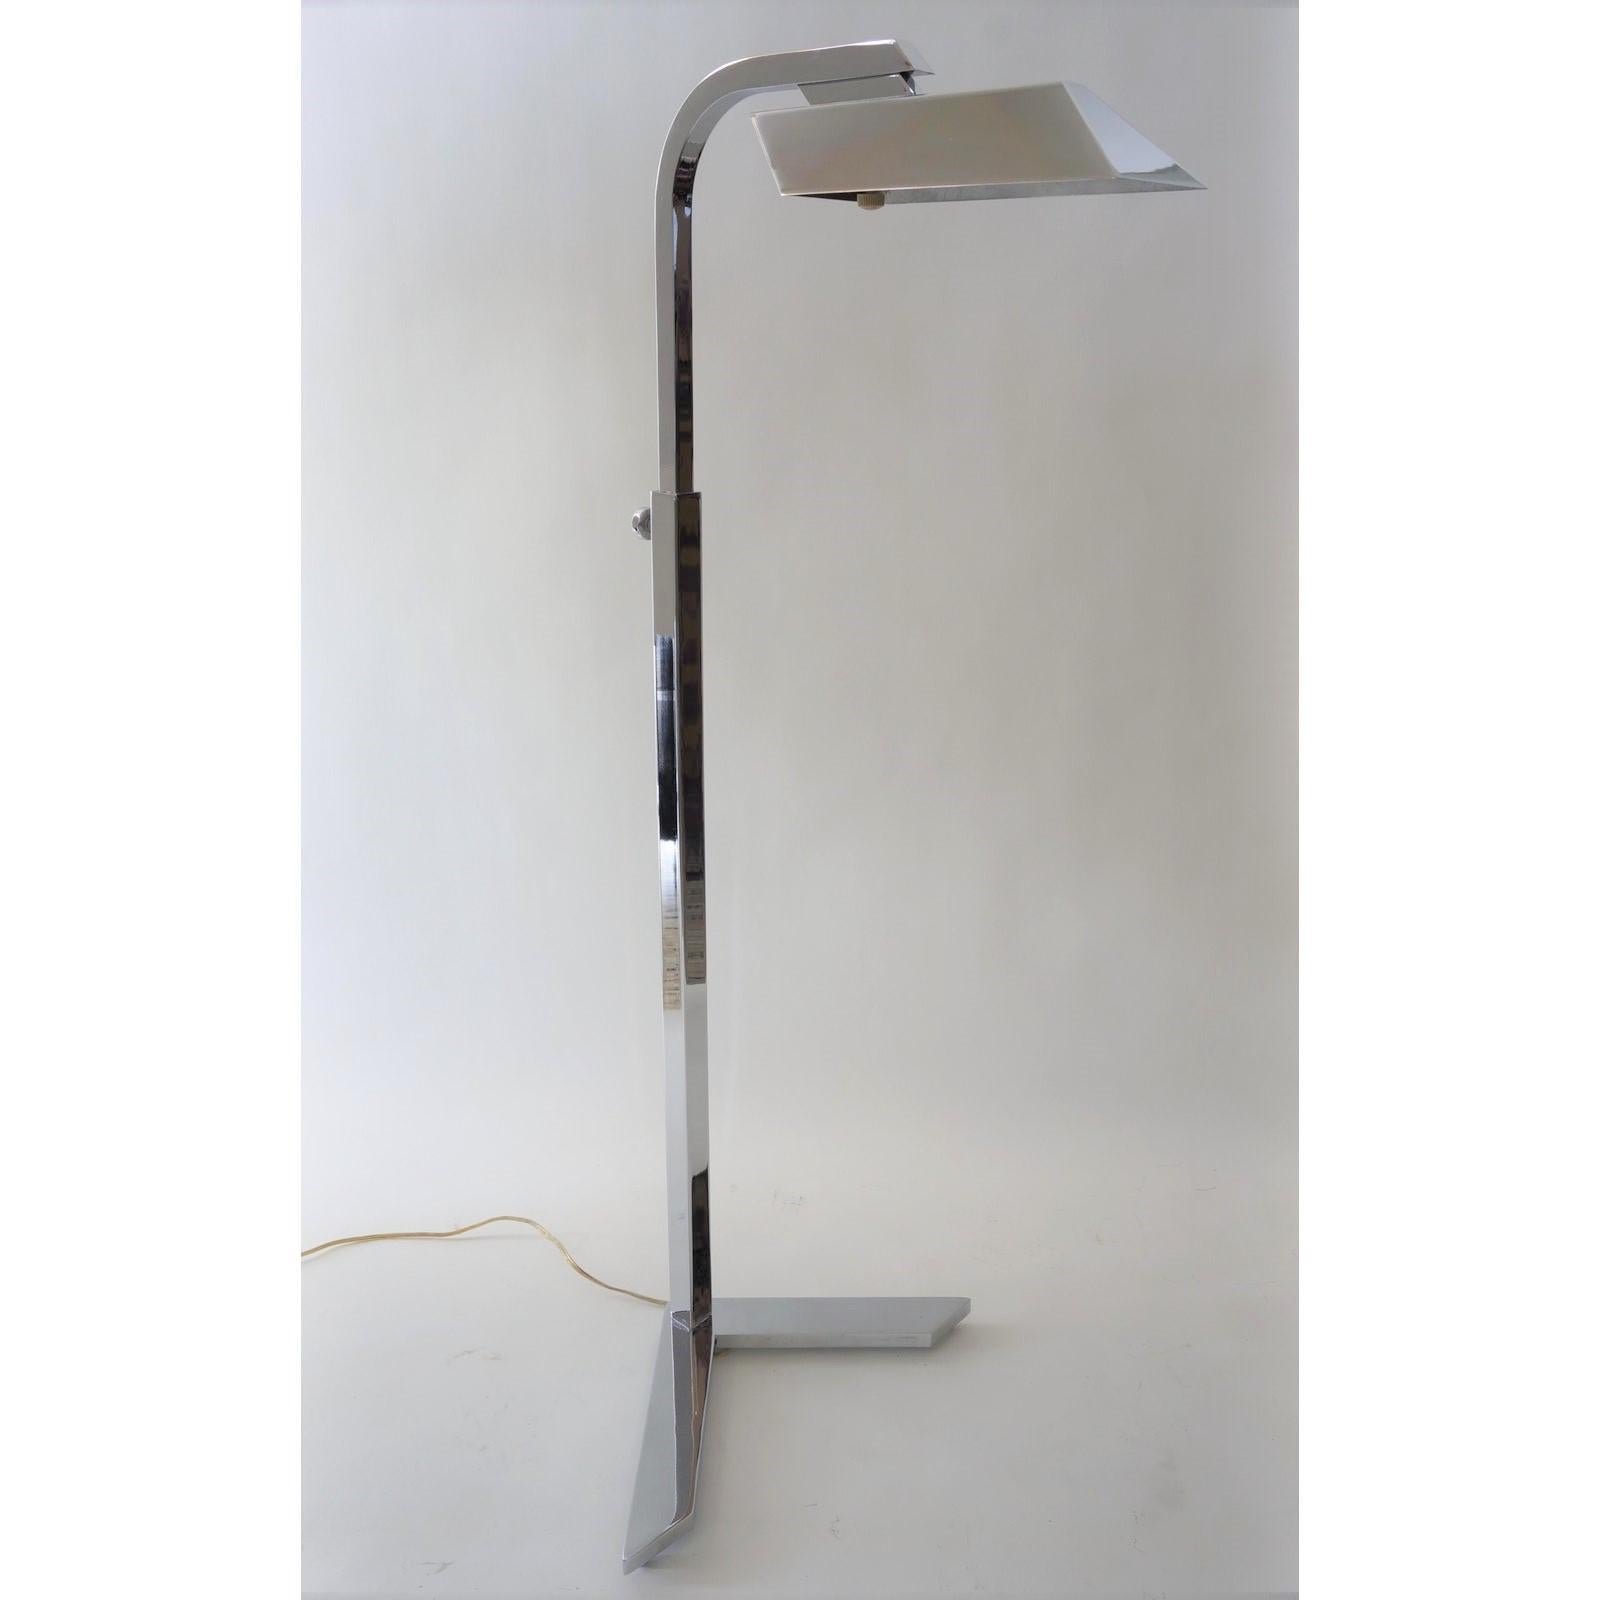 Vintage Casella style floor lamp - adjustable polished chrome - from a Palm Beach estate

Adjusts from a low height of 58 3/4